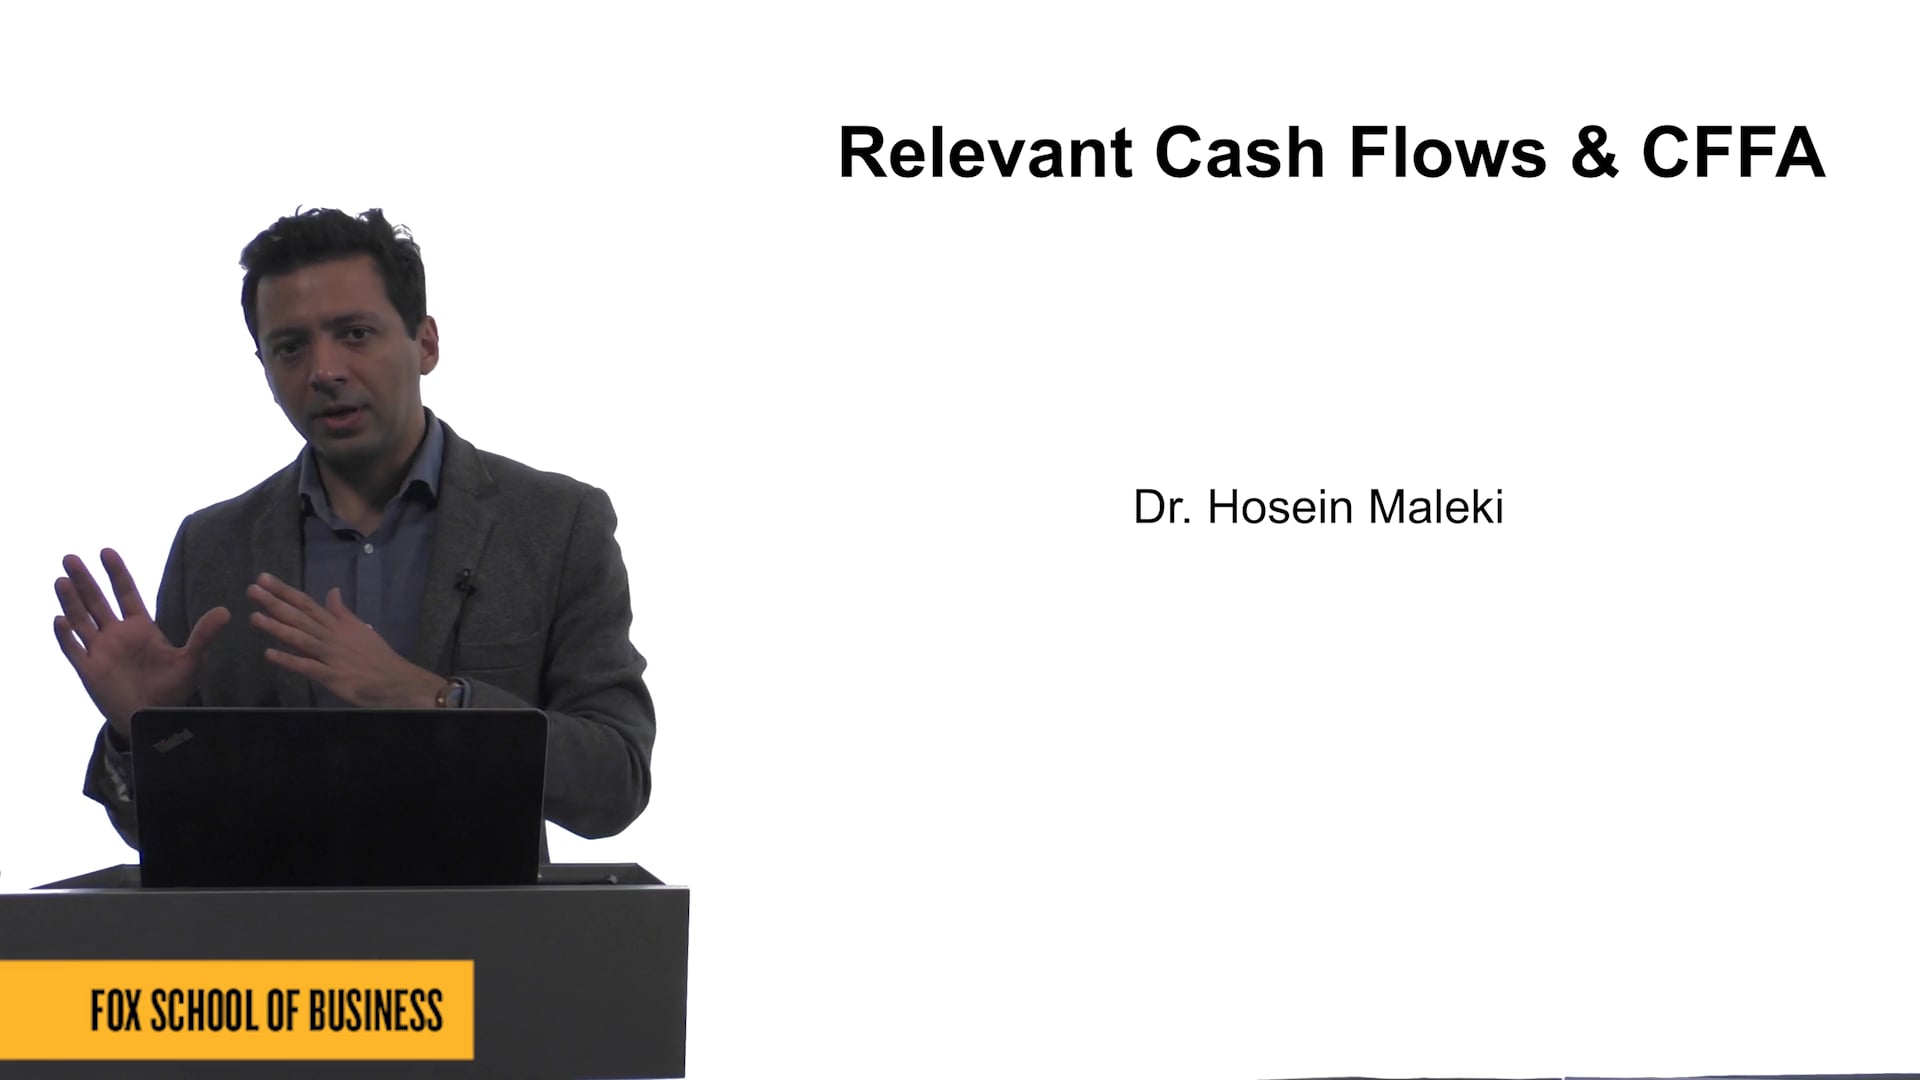 Relevant Cash Flows and CFFA